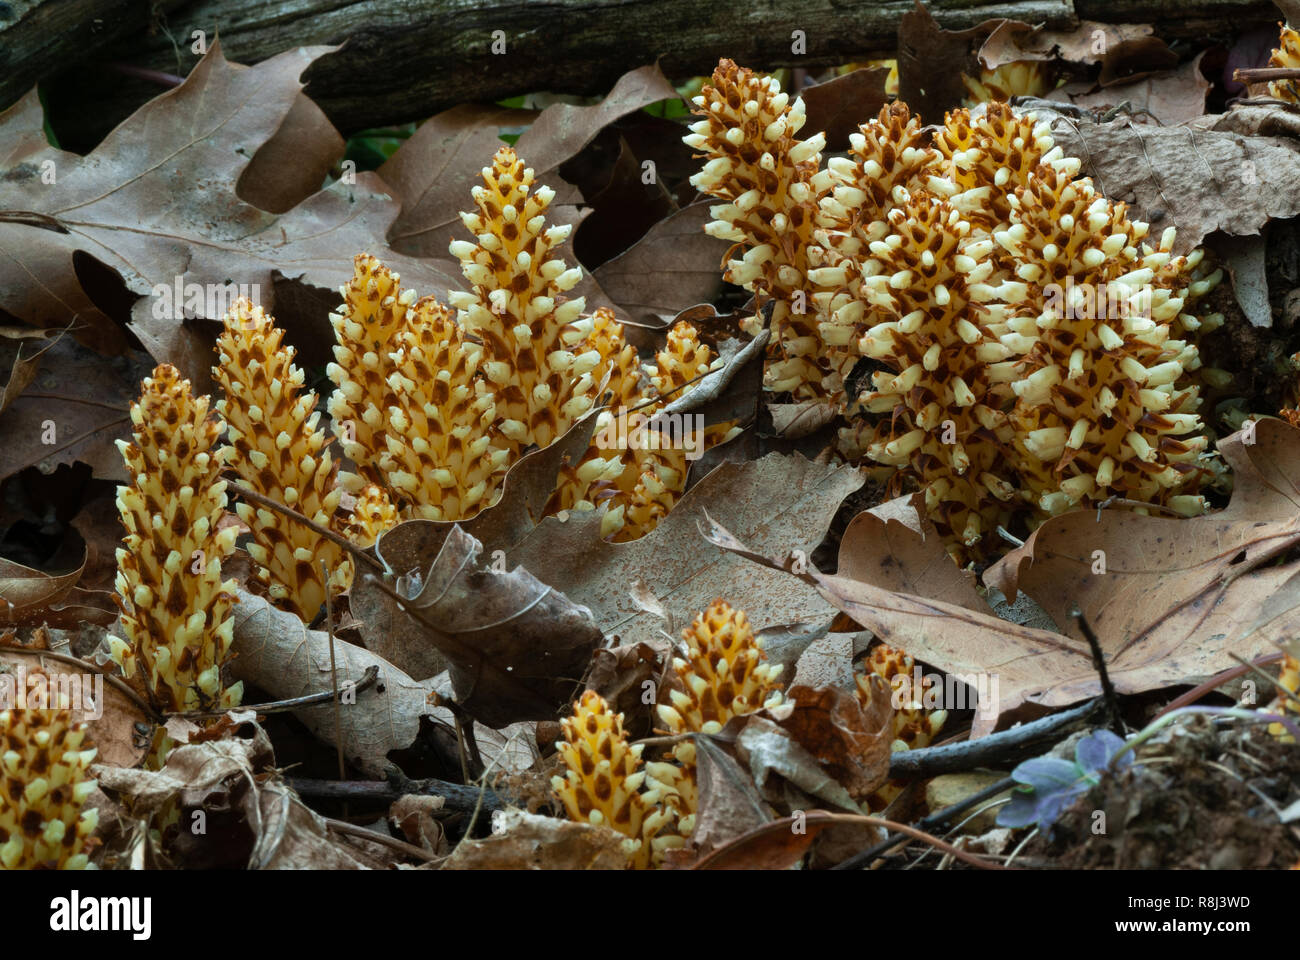 Squawroot (Conopholis americana) is a perennial, non-photosynthesizing parasitic plant found in forests in the eastern half of Canada and the U.S. Whi Stock Photo